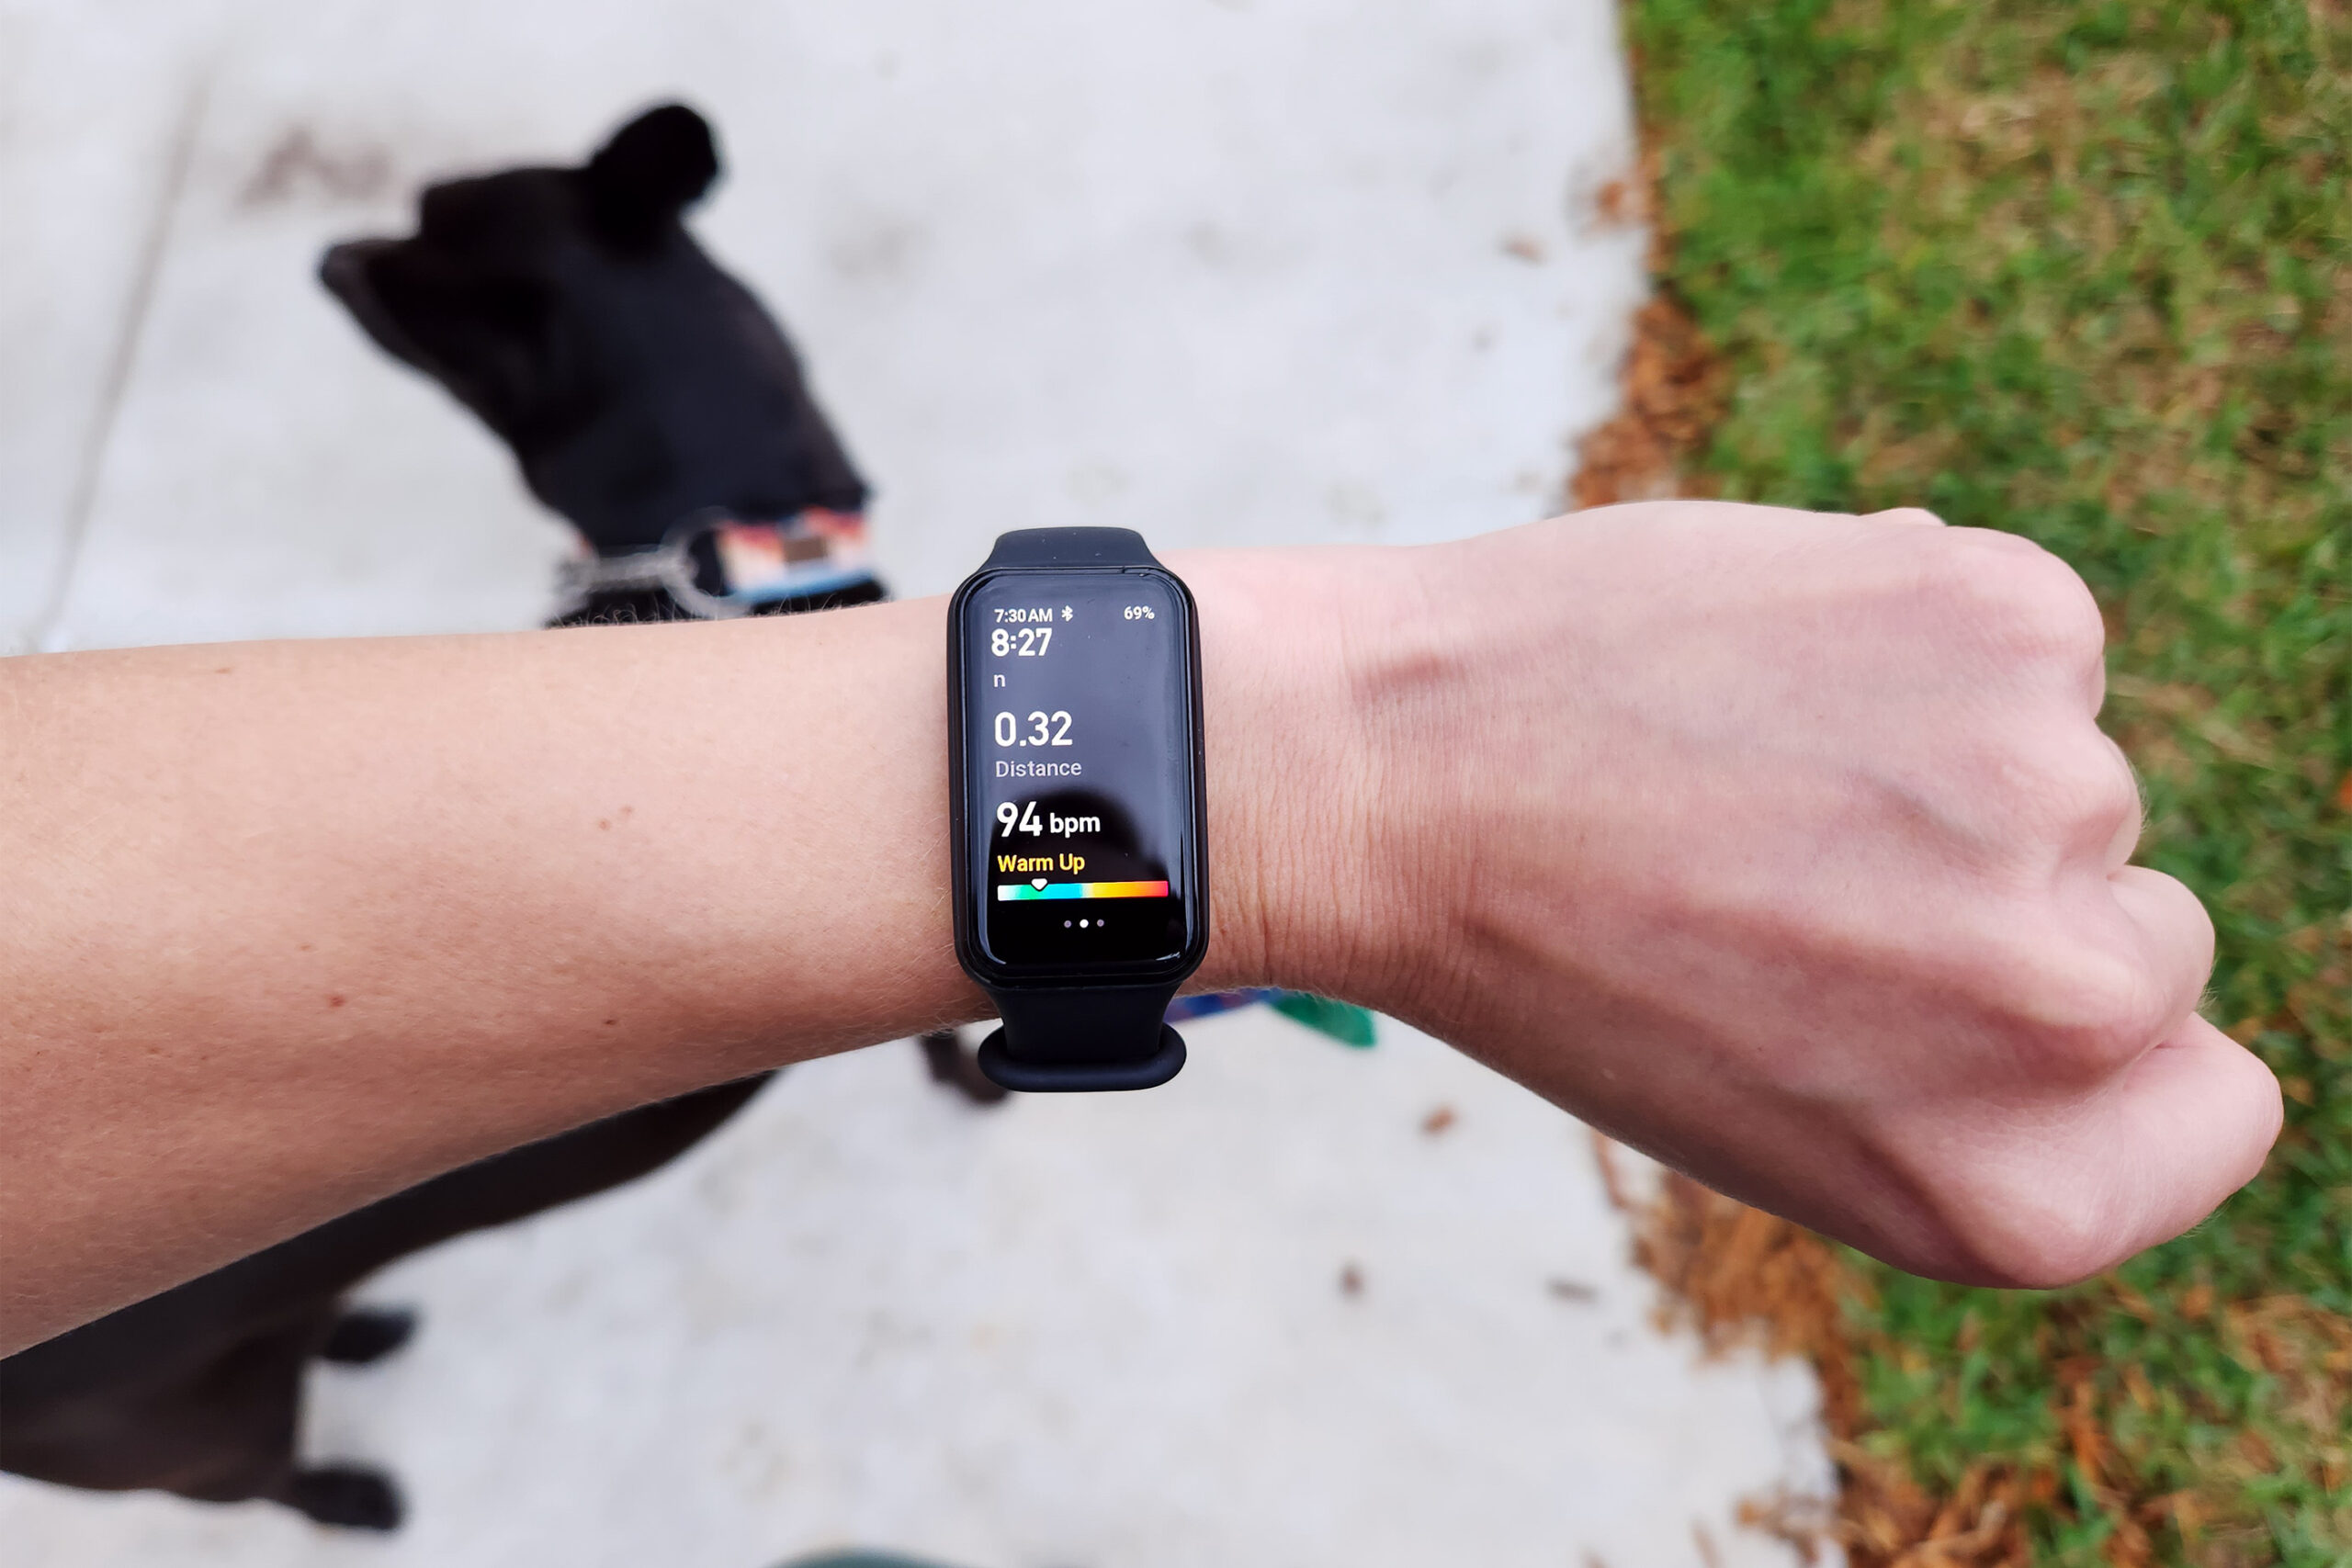 Amazfit 7 fitness & health tracker review: Back to Popular Science